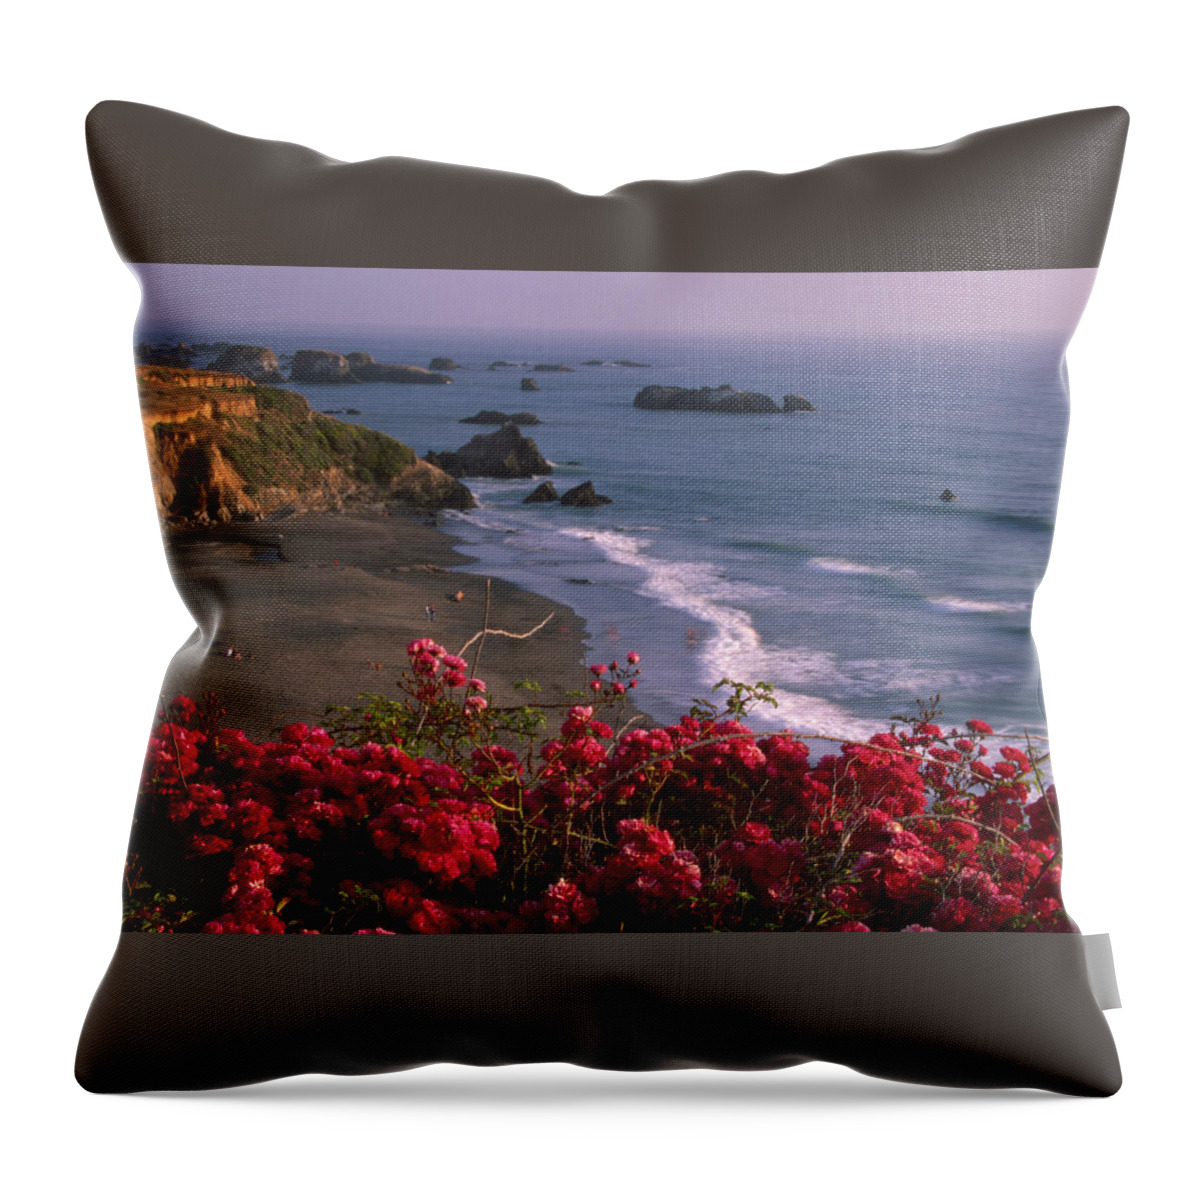 Flowers Throw Pillow featuring the photograph Those North Coast Beaches by Soli Deo Gloria Wilderness And Wildlife Photography